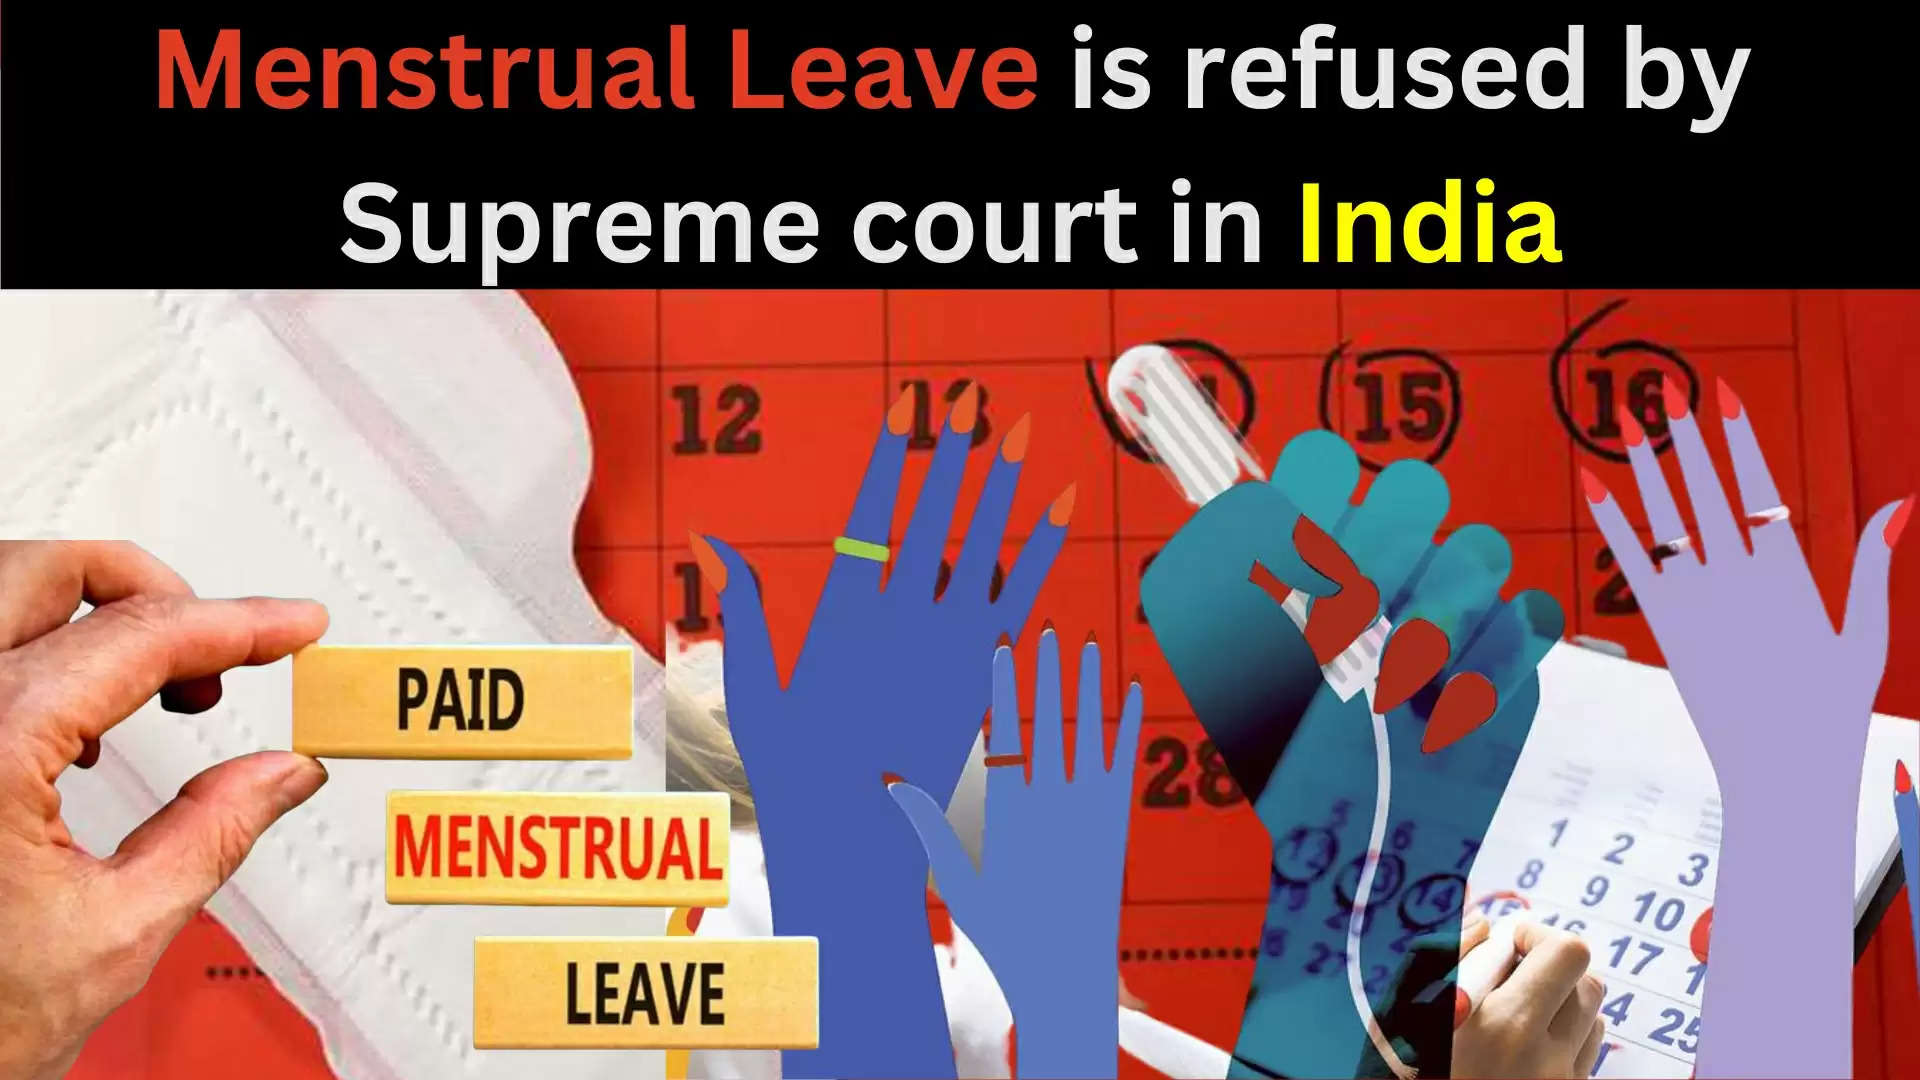 IS MENSTRUAL LEAVE NOT RIGHT IN INDIA?